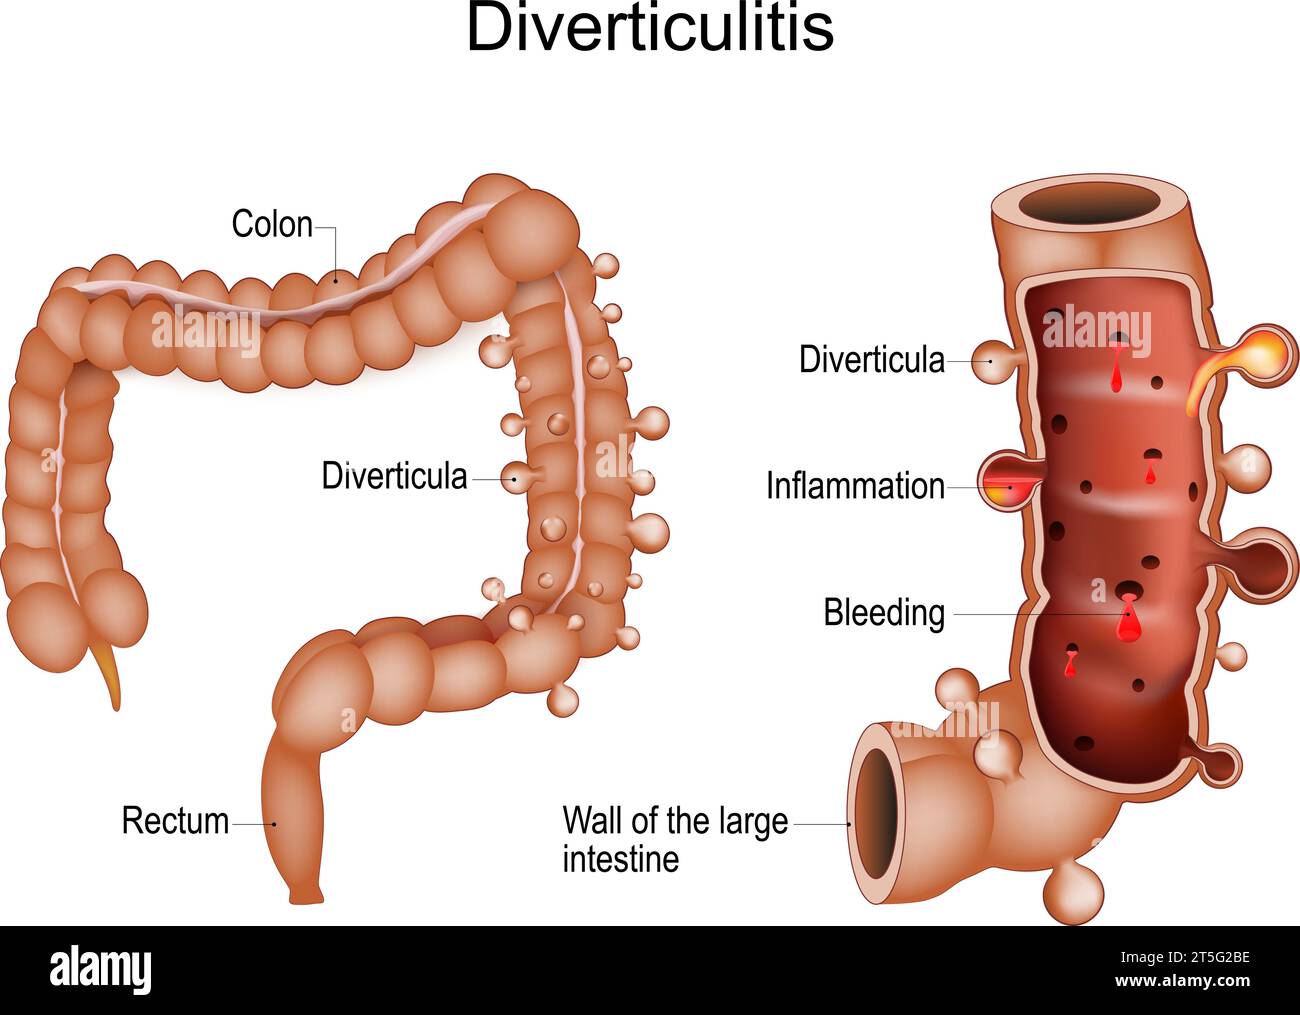 Colonic Diverticulitis. Cross section of a colon with bleeding and inflammation of abnormal pouches or Diverticula. gastrointestinal disease. Human la Stock Vector